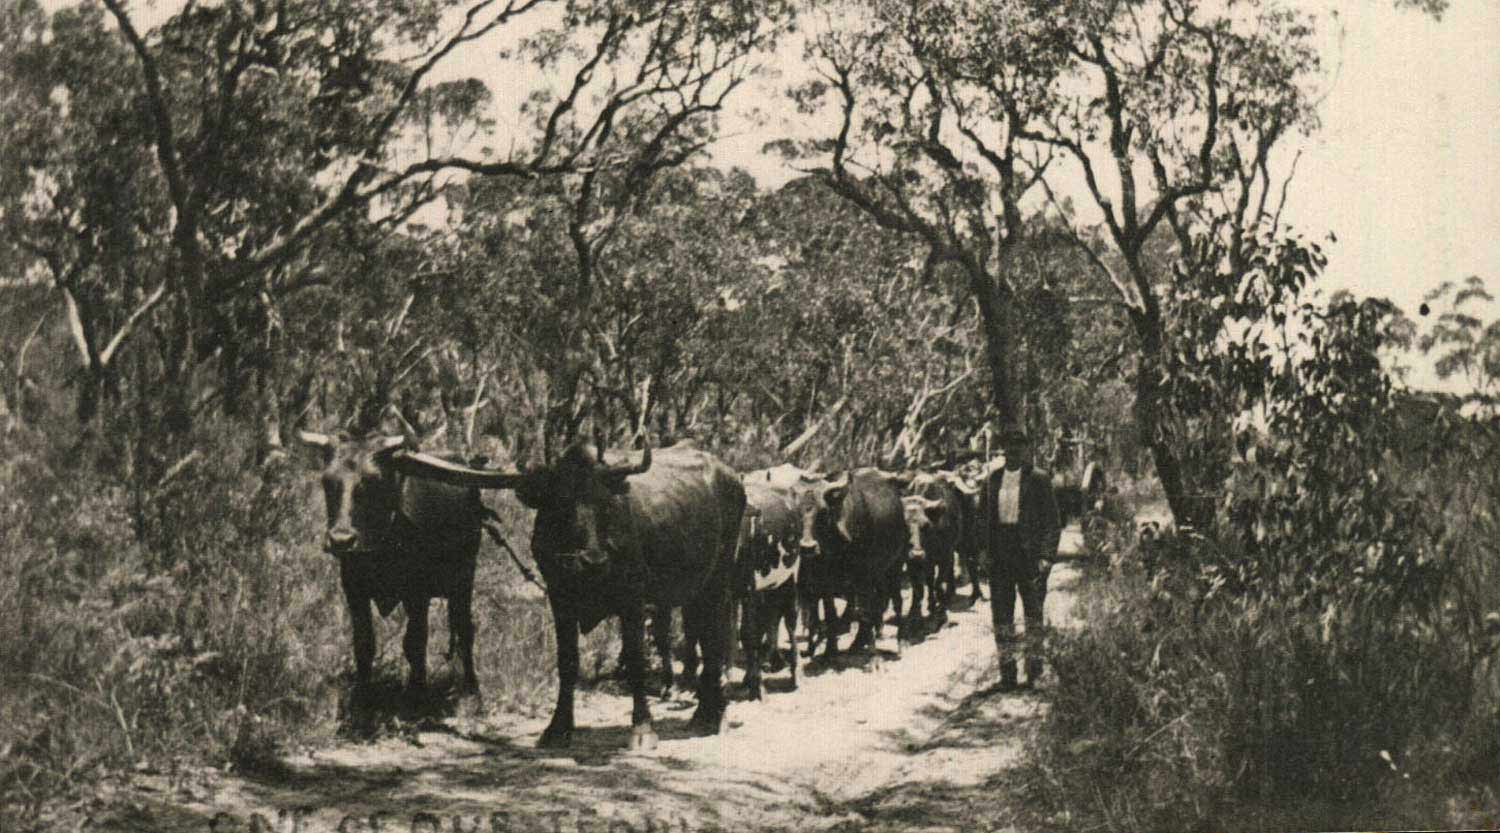 Droving Bullock in times past, Booderee National Park